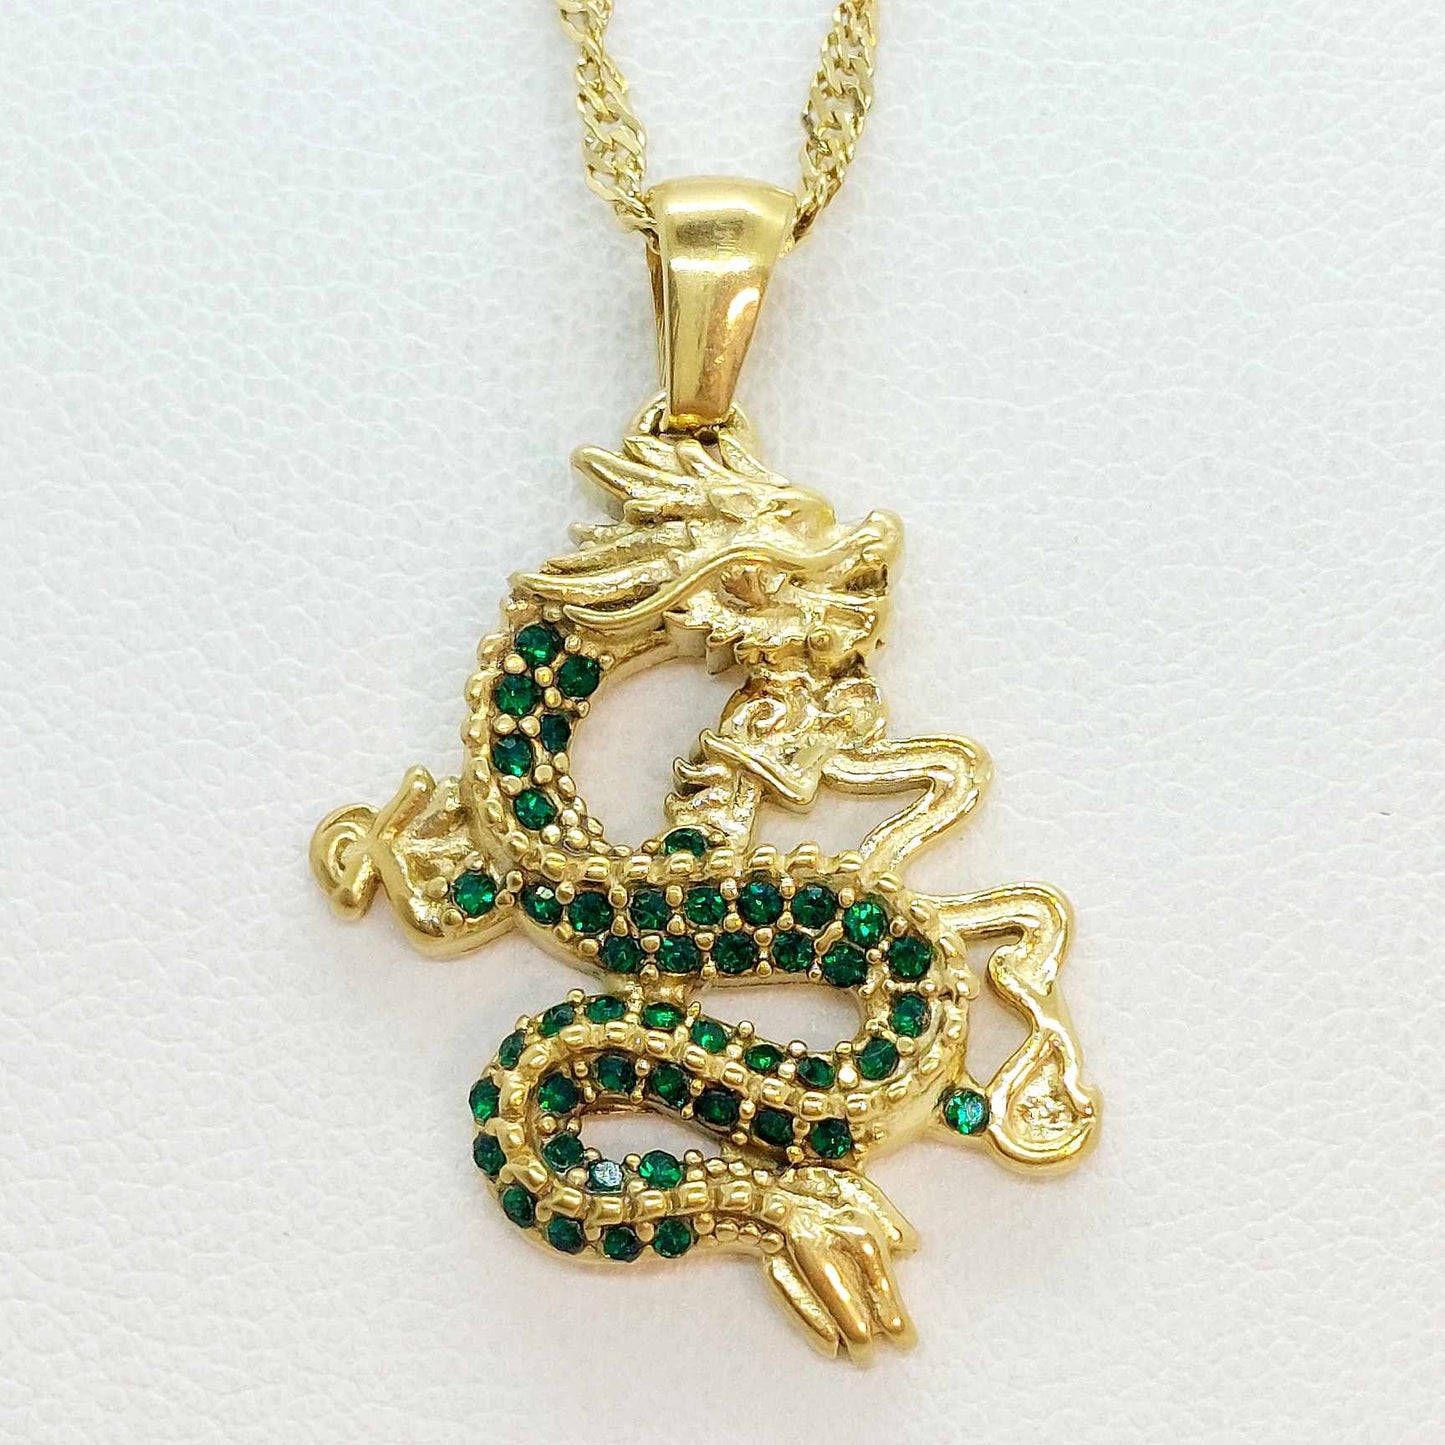 Dragon Pendant in Zircon with Stainless Steel Chain Gold Plated